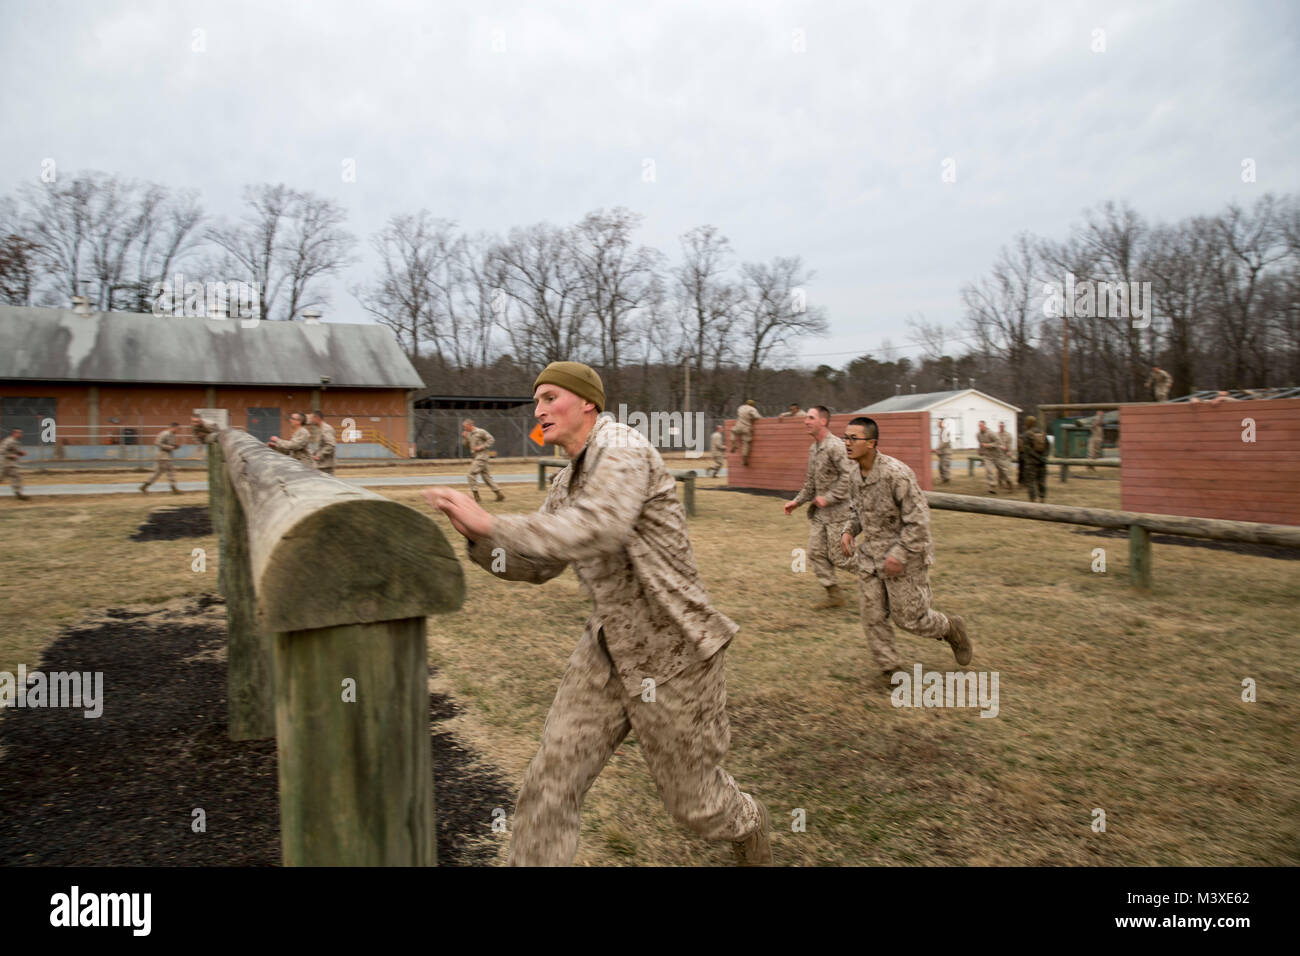 U.S. Marine Corps officer candidates participate in an obstacle course event, at Officer Candidate School, Quantico, Va., Feb. 1, 2018. Candidates must go through three months of intensive training to evaluate and screen individuals for the leadership, moral, mental, and physical qualities required for commissioning as a U.S. Marine Corps officer. (U.S. Marine Corps Photo by Cpl. Brooke Deiters) Stock Photo